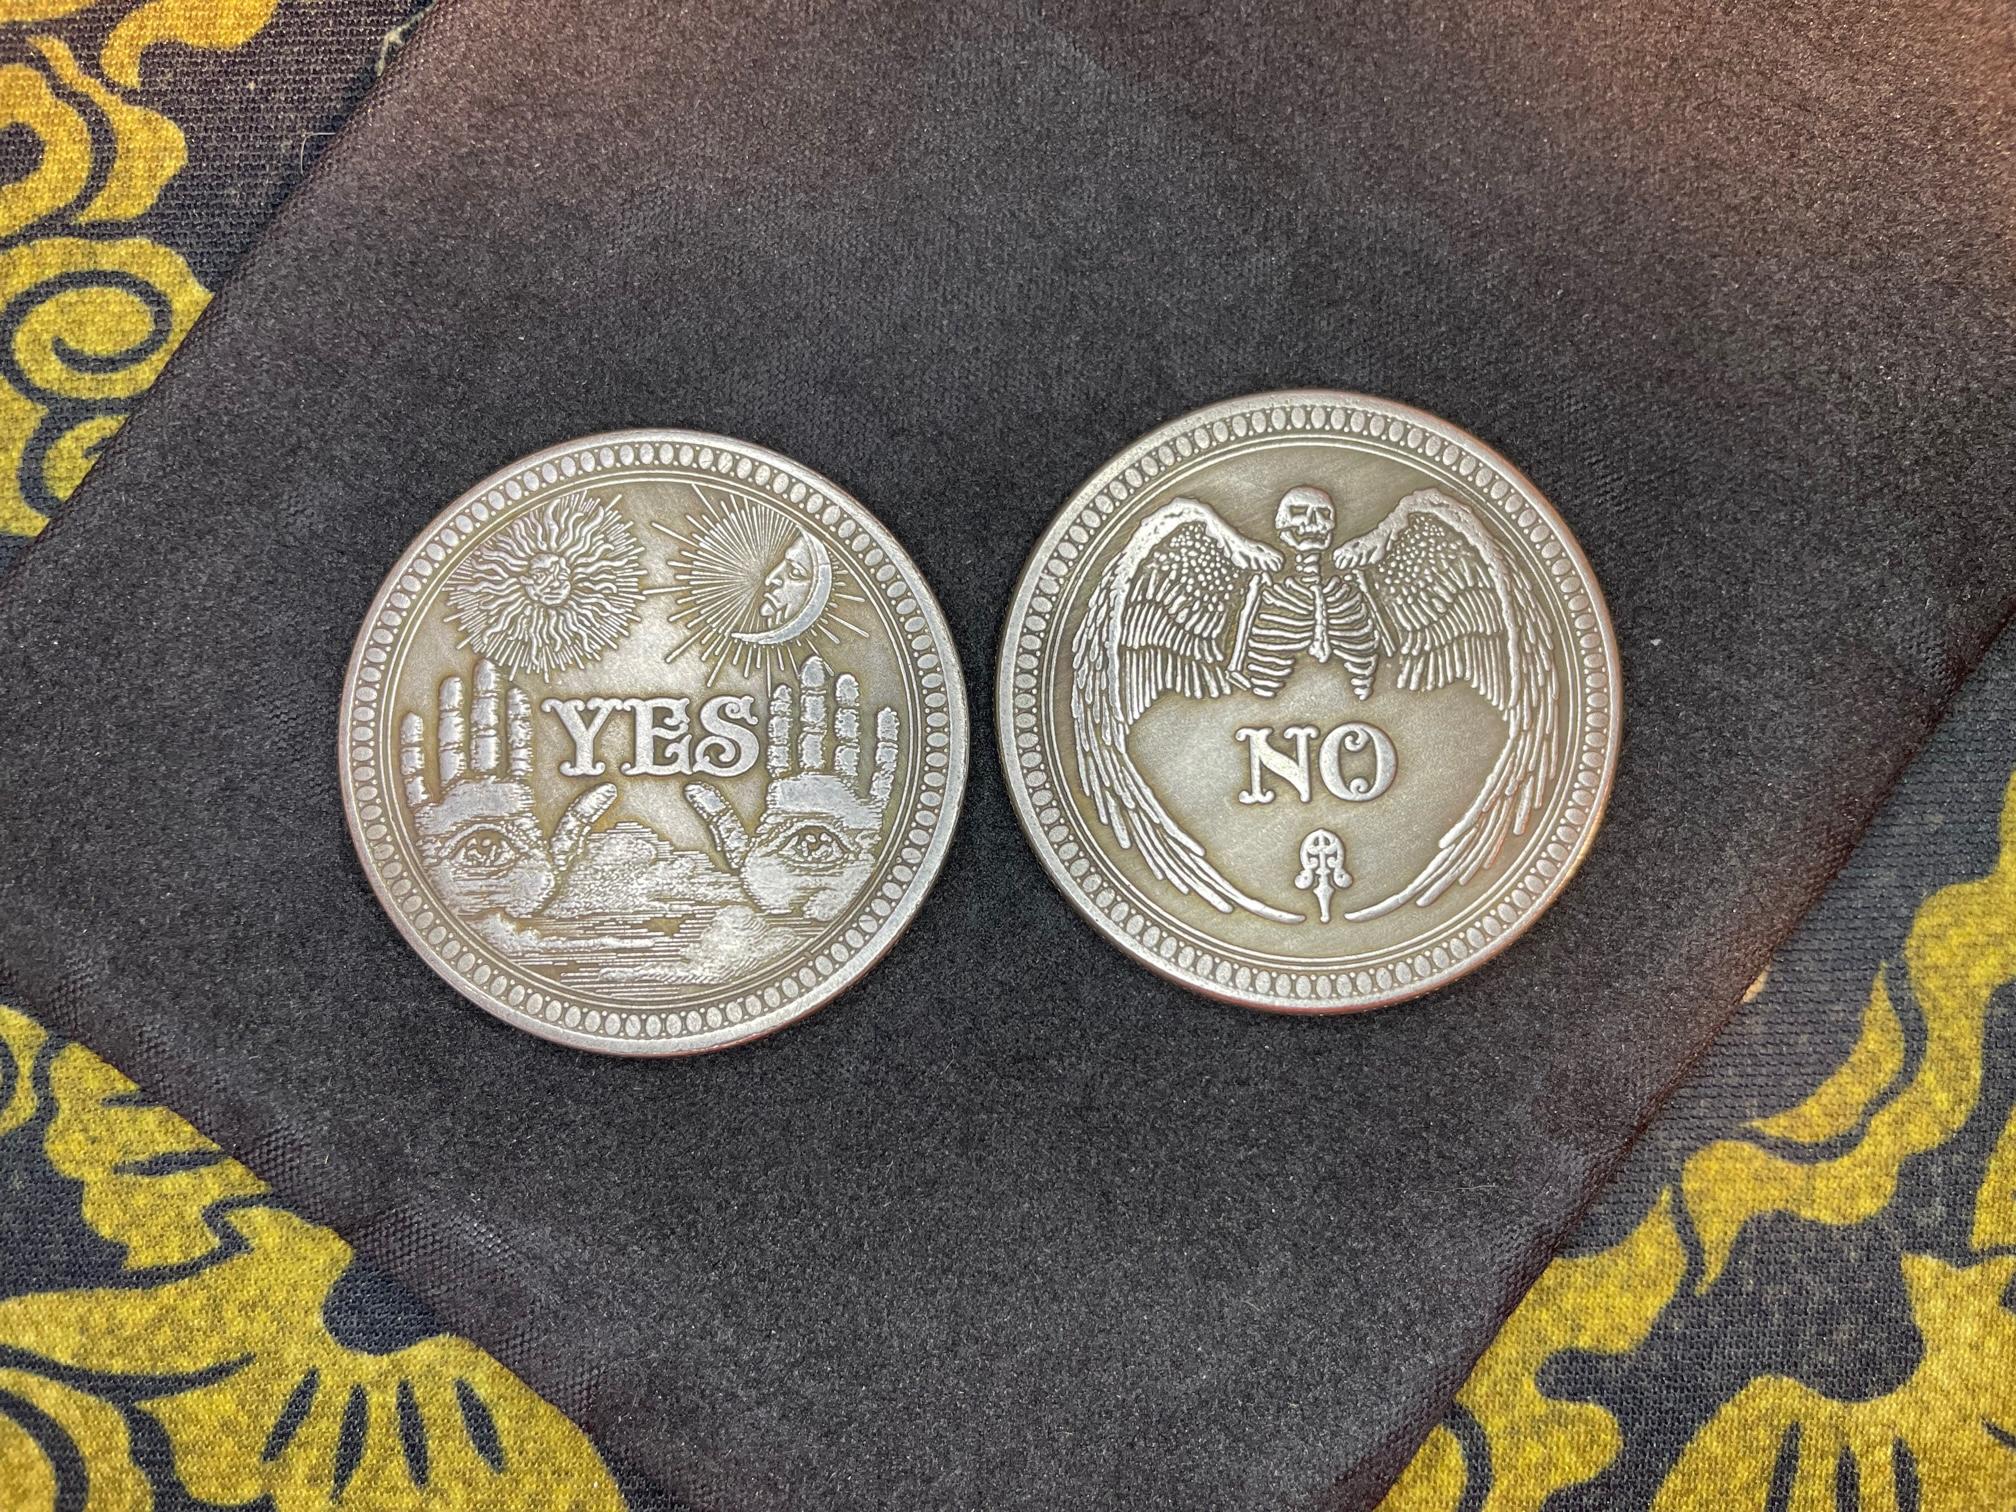 yes no decision prediction coin all seeing eye sun crescent moon skeleton skull death angel